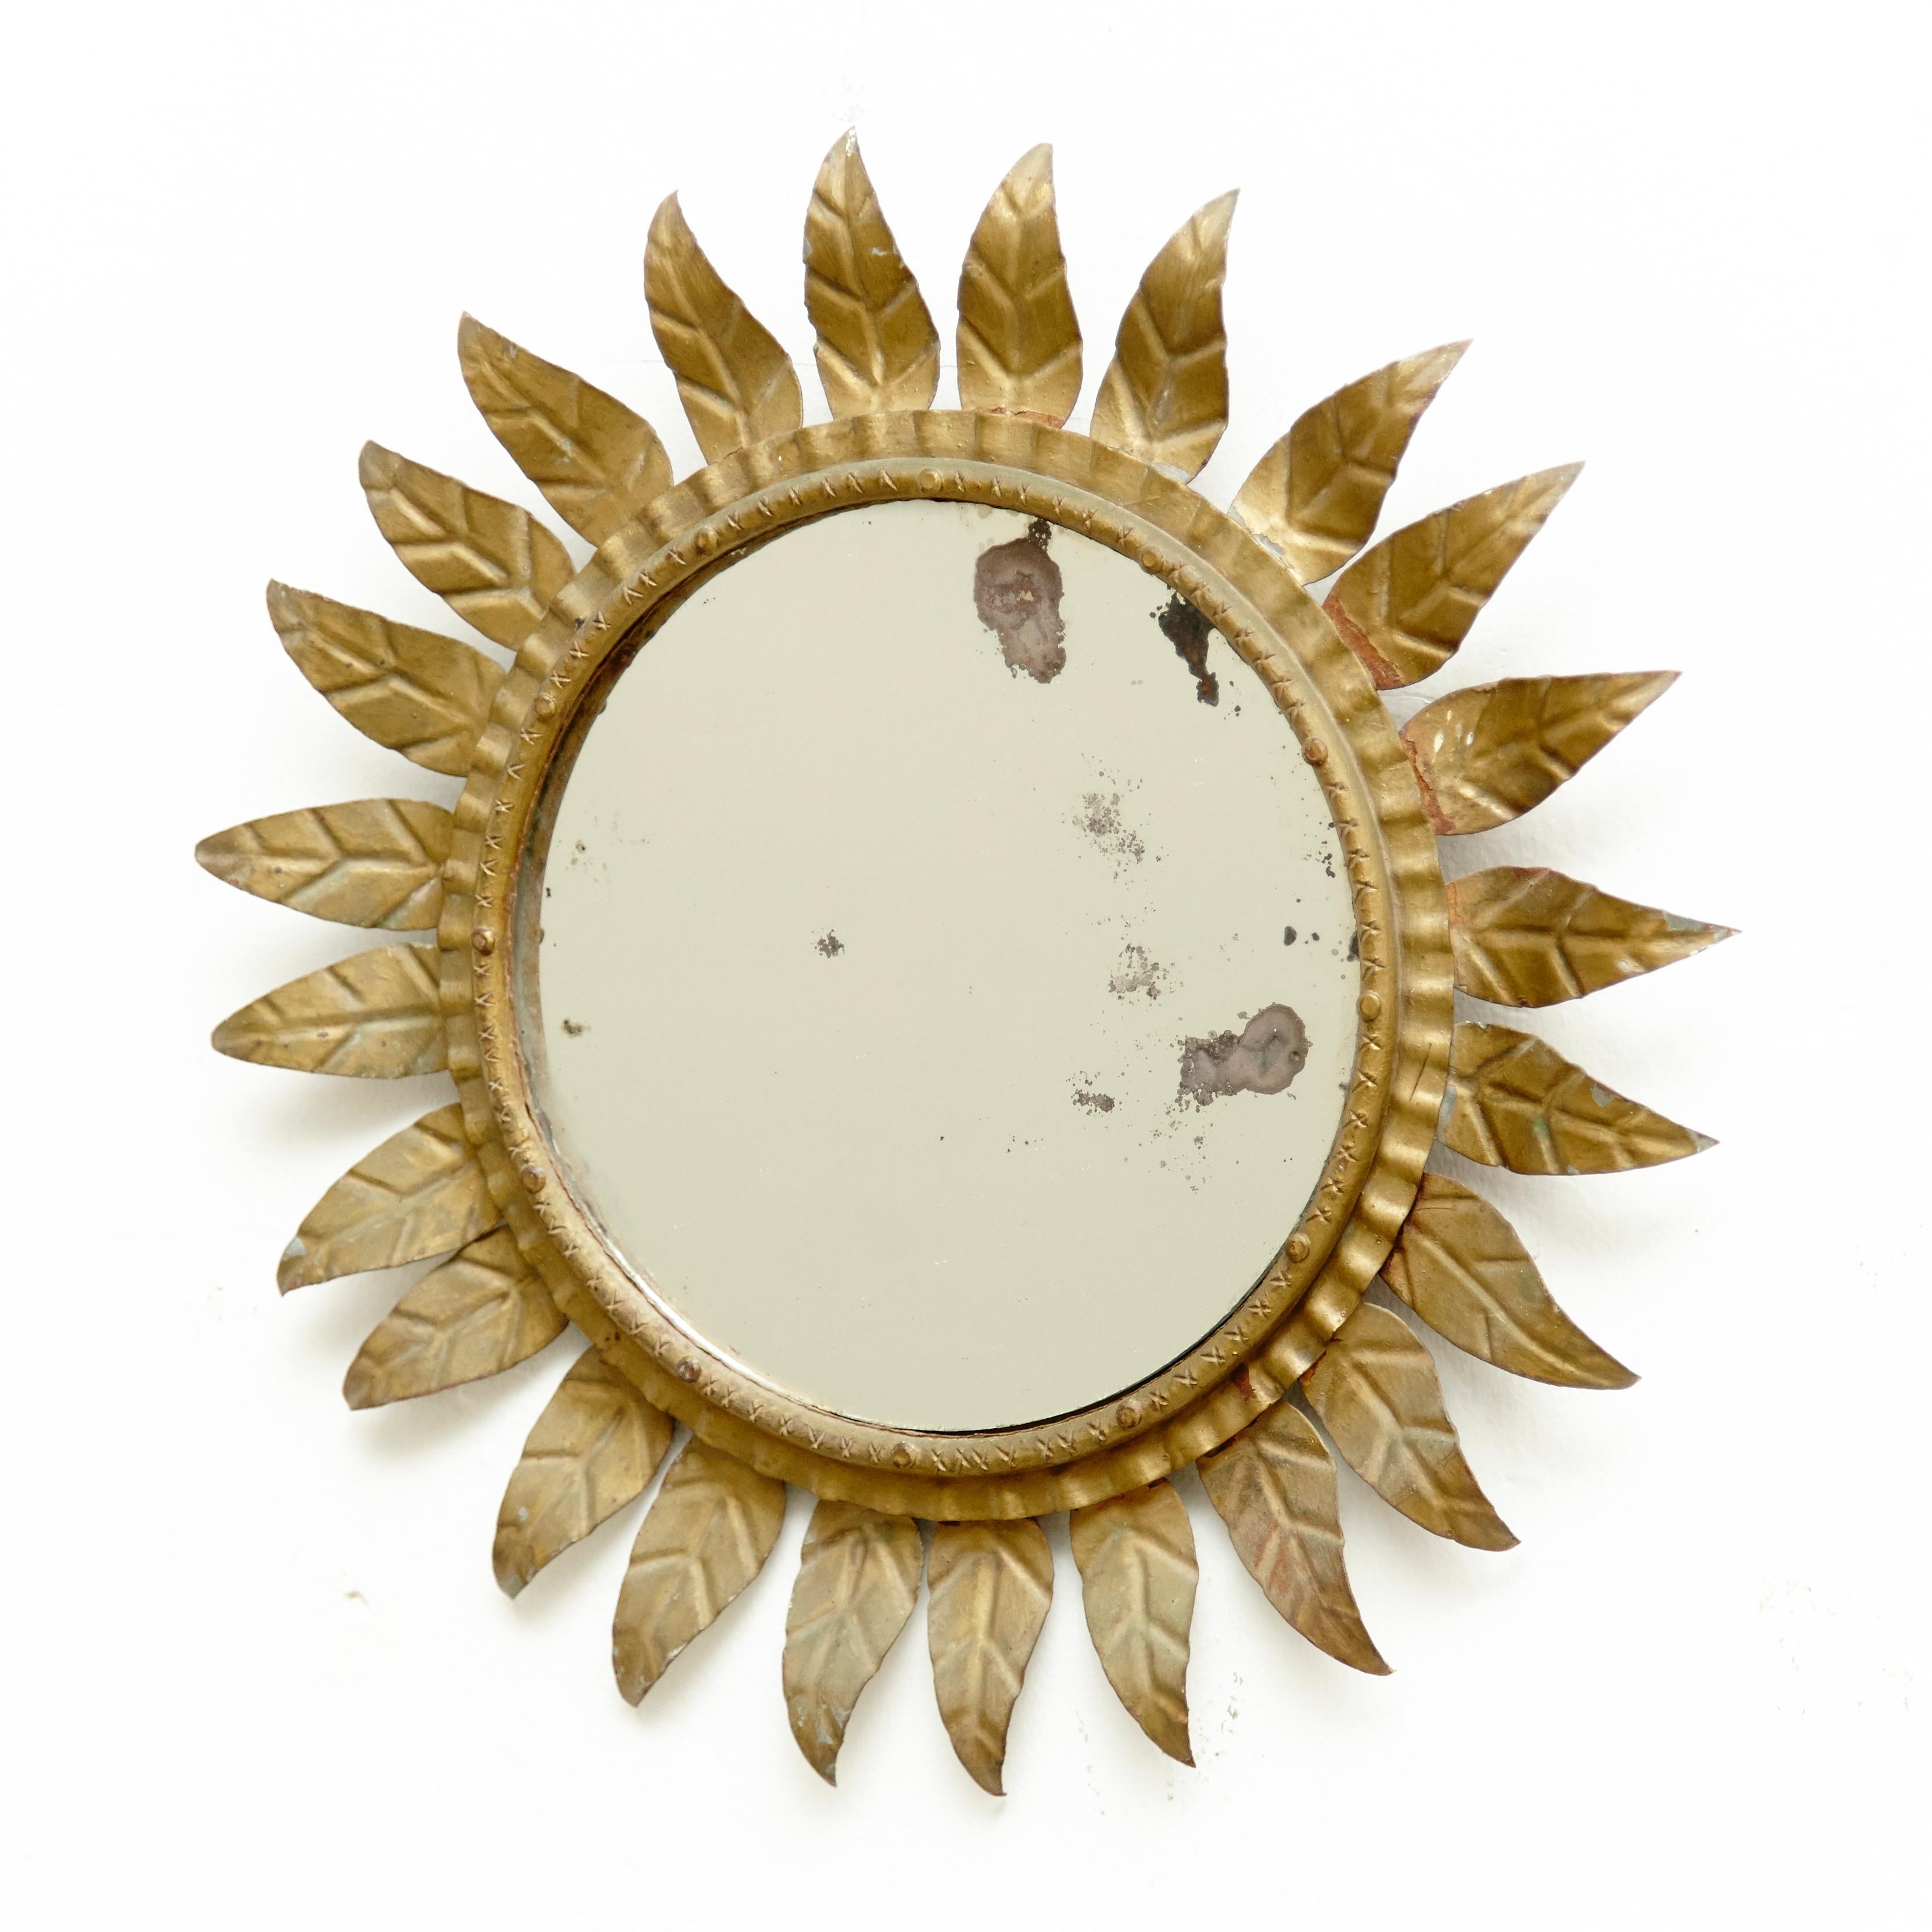 Mid-Century Modern sunburst mirror brass, circa 1960
Traditionally manufactured in France.
By unknown designer.

In original condition with minor wear consistent of age and use, preserving a beautiful patina.

